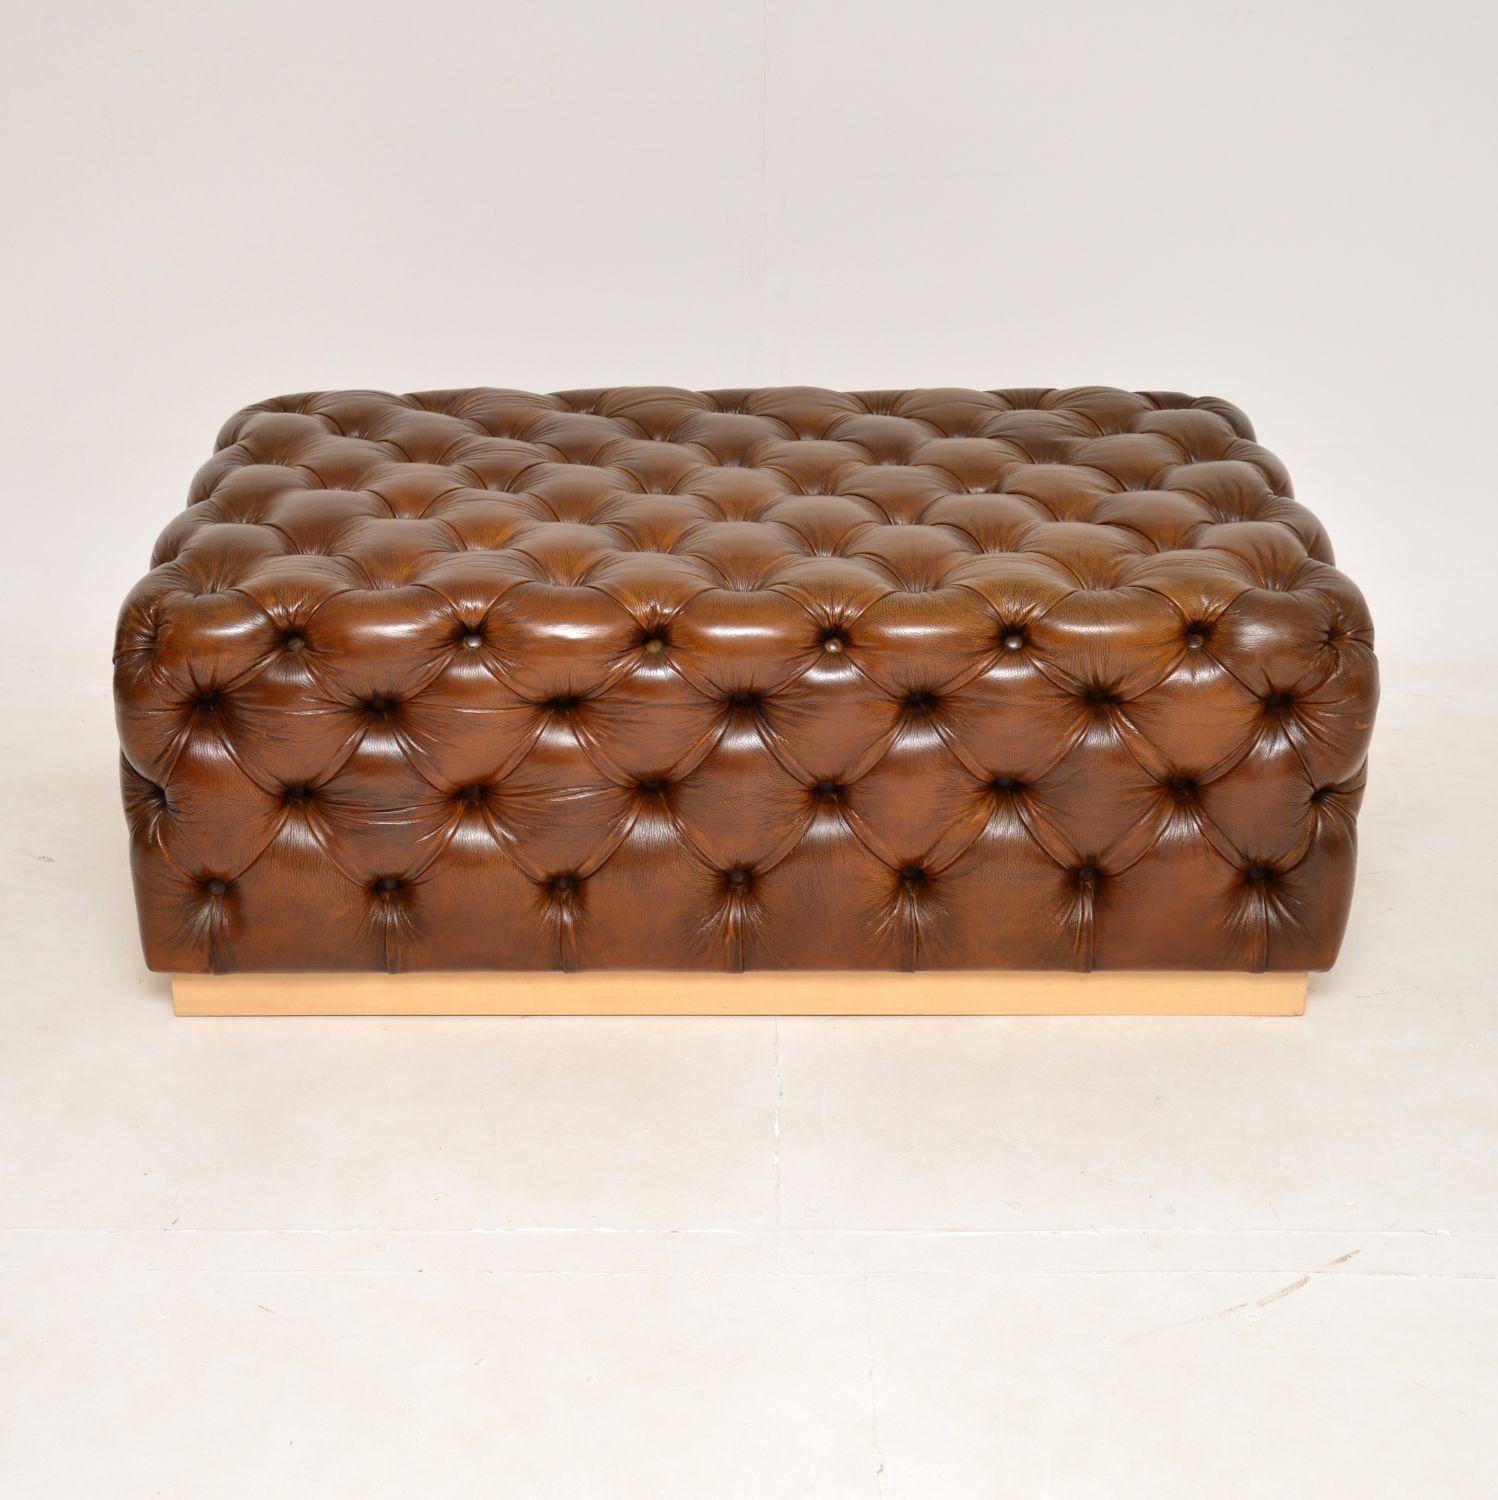 A stylish and very useful deep buttoned leather ottoman stool. This is not antique, it probably dates from the late 20th century, but it has been hand coloured by our leather restorer to give it beautiful and unique look.

It is a great size and is